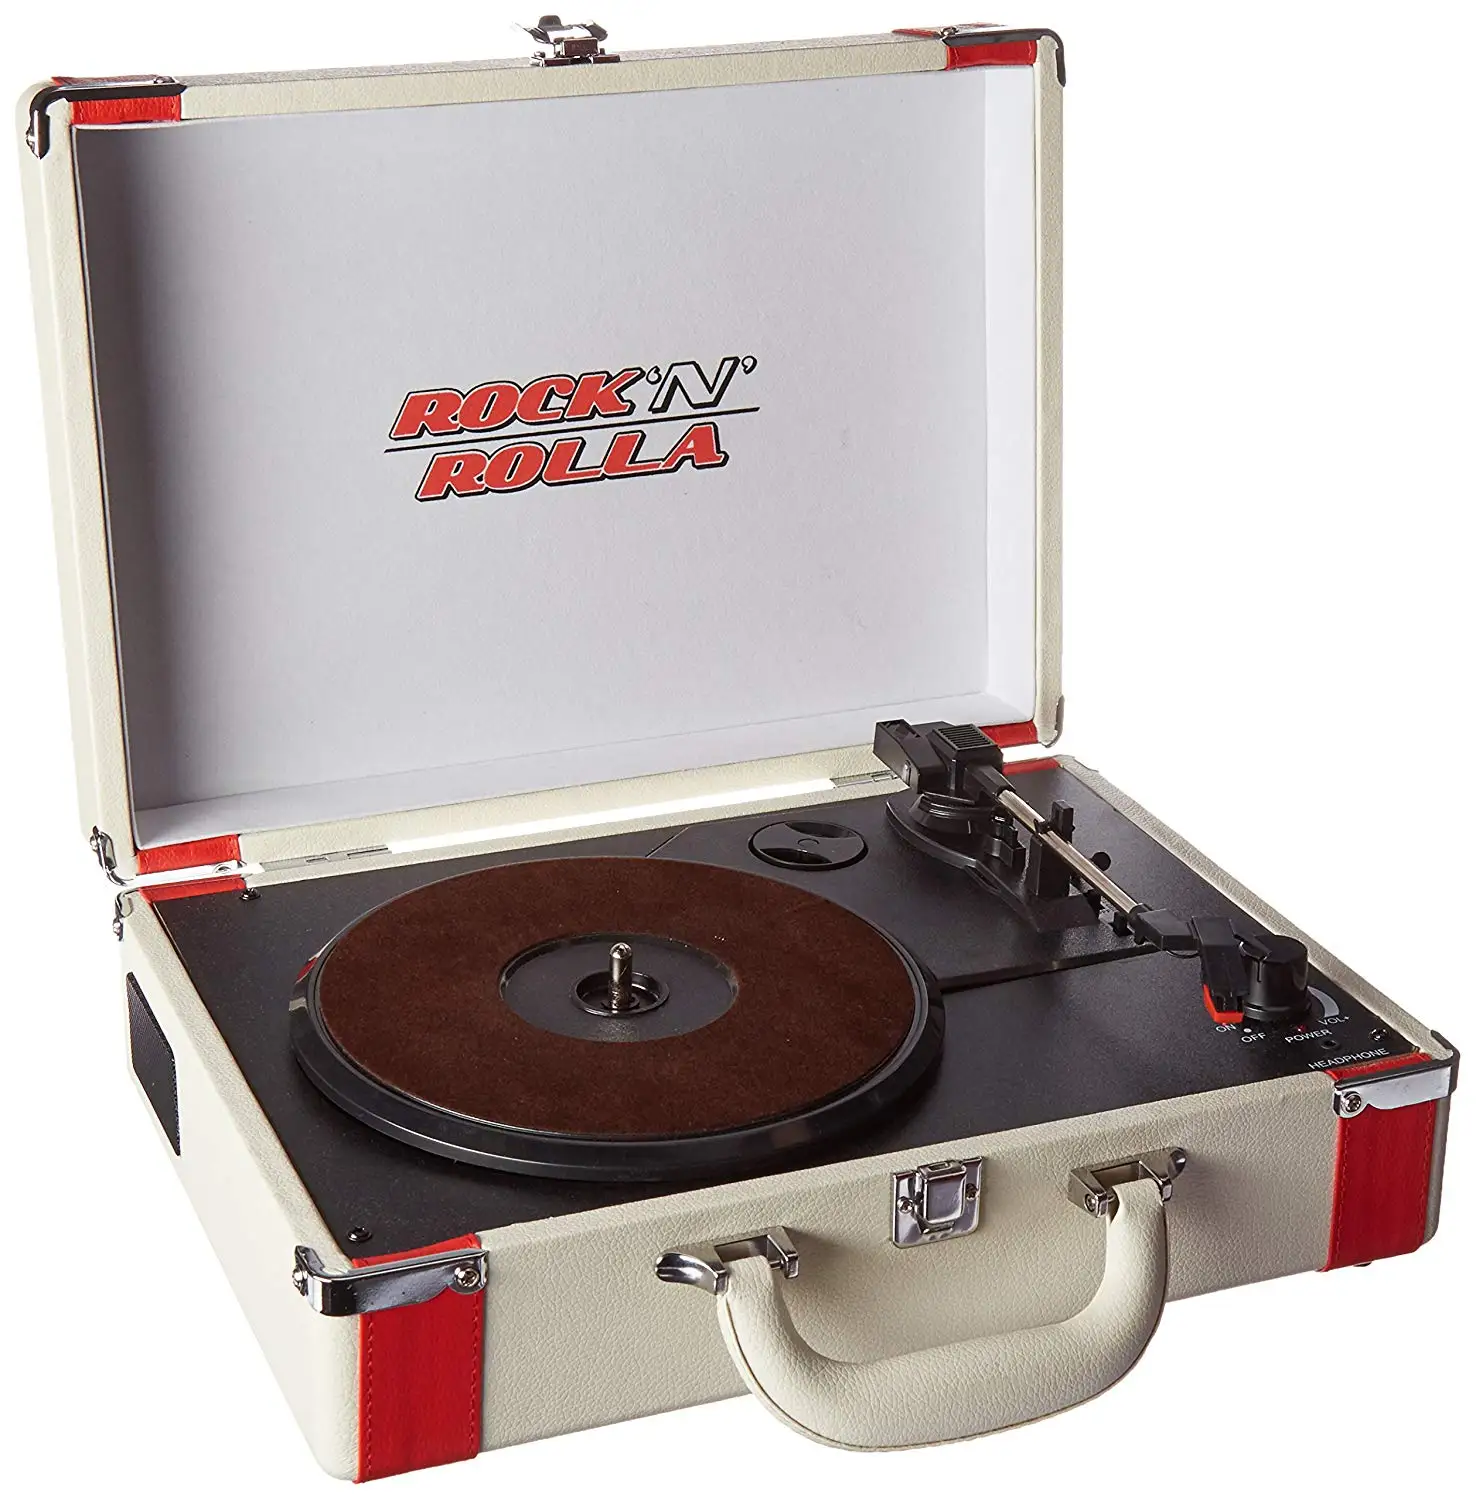 refurbished record players for sale